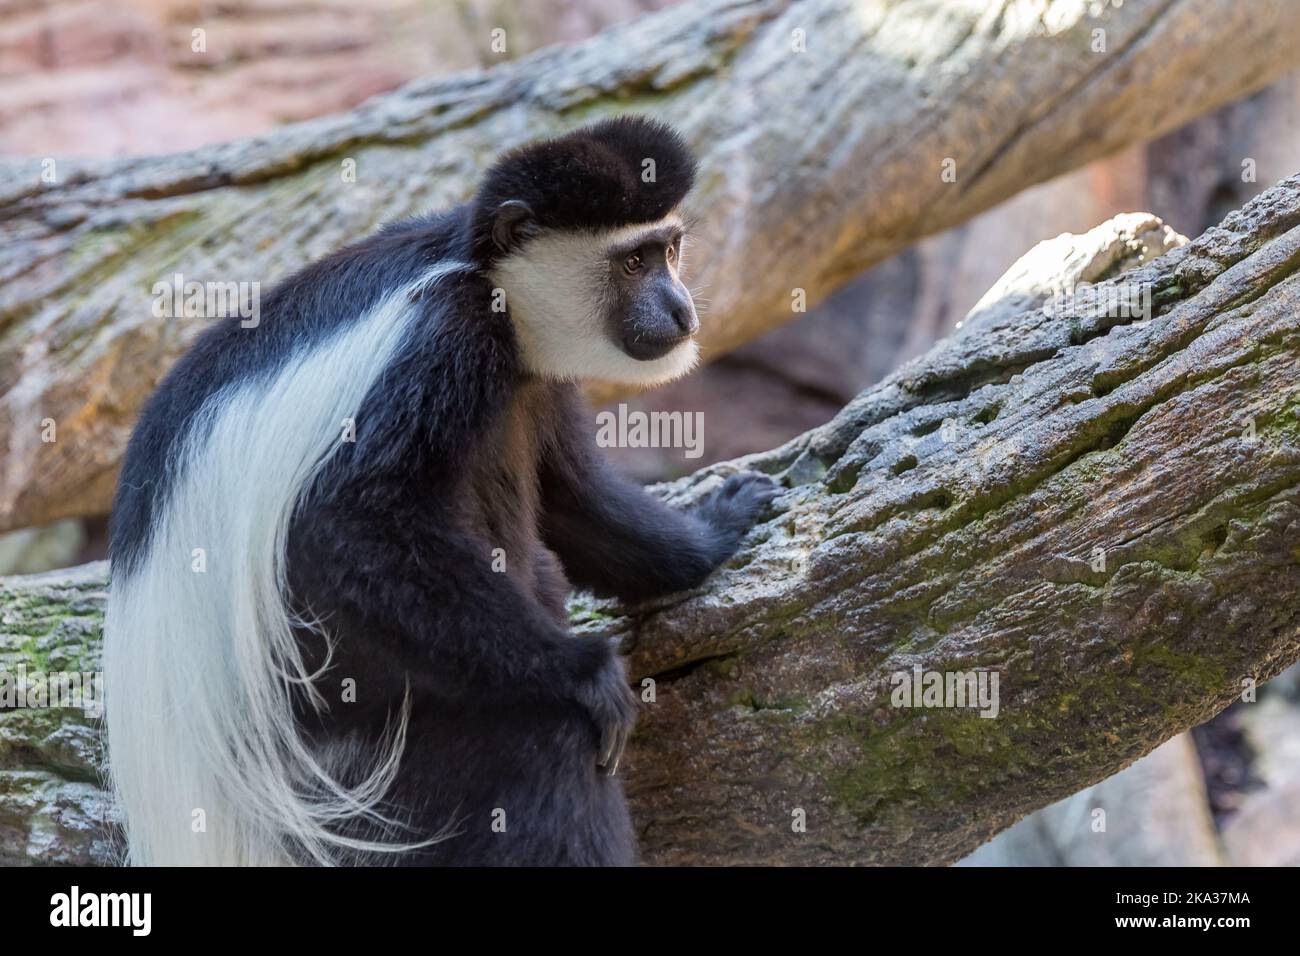 A closeup of an adorable black-and-white colobus old world monkey sitting on the tree branch Stock Photo